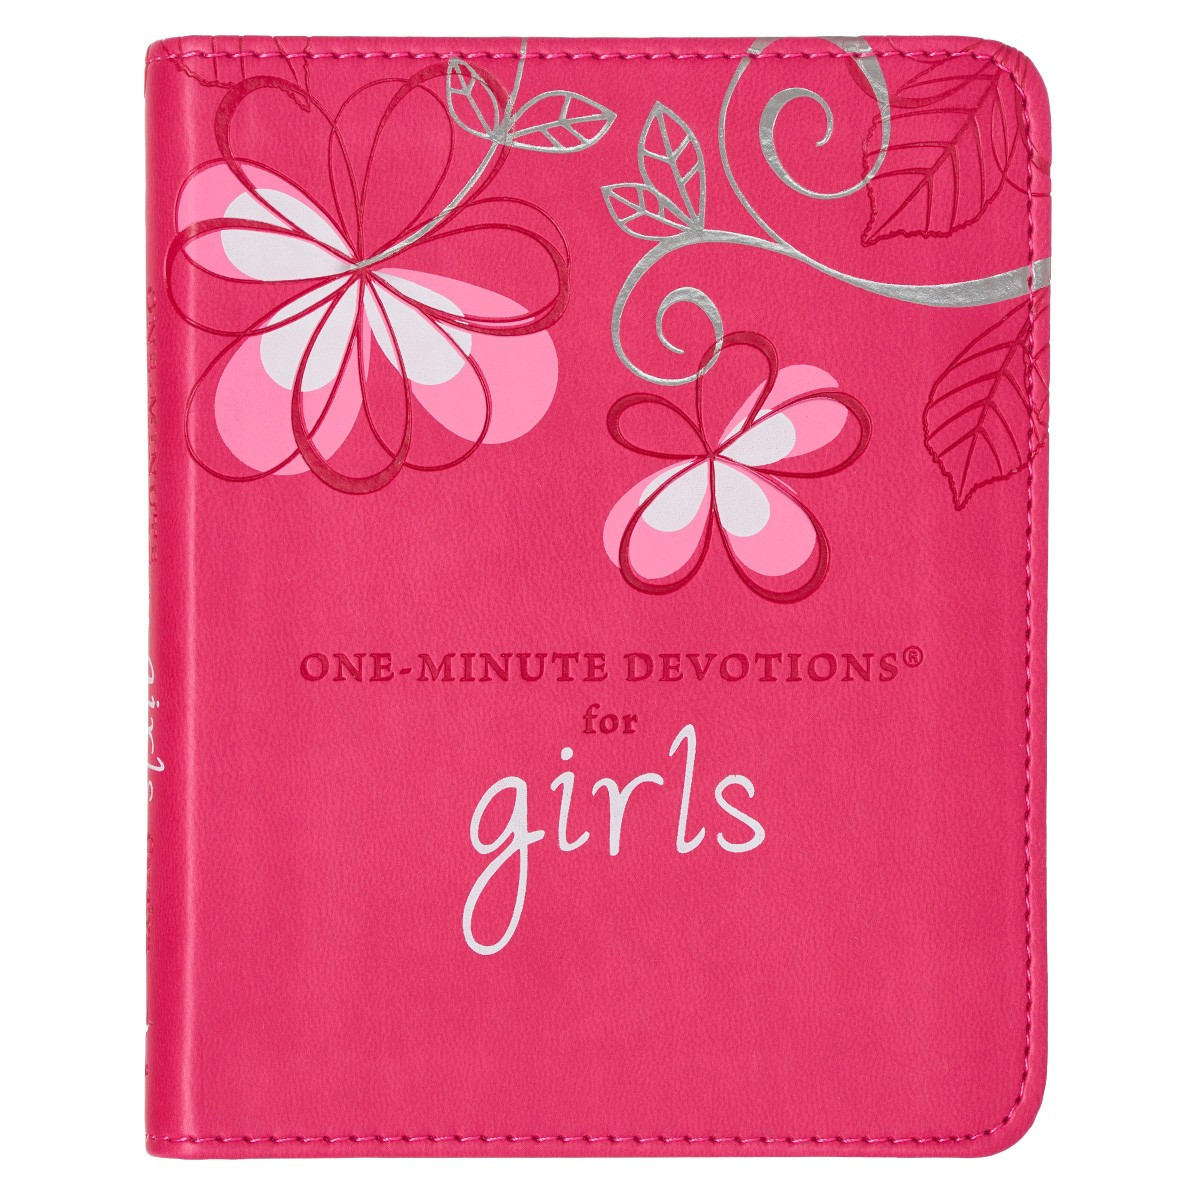 One Minute Devotions for Girls